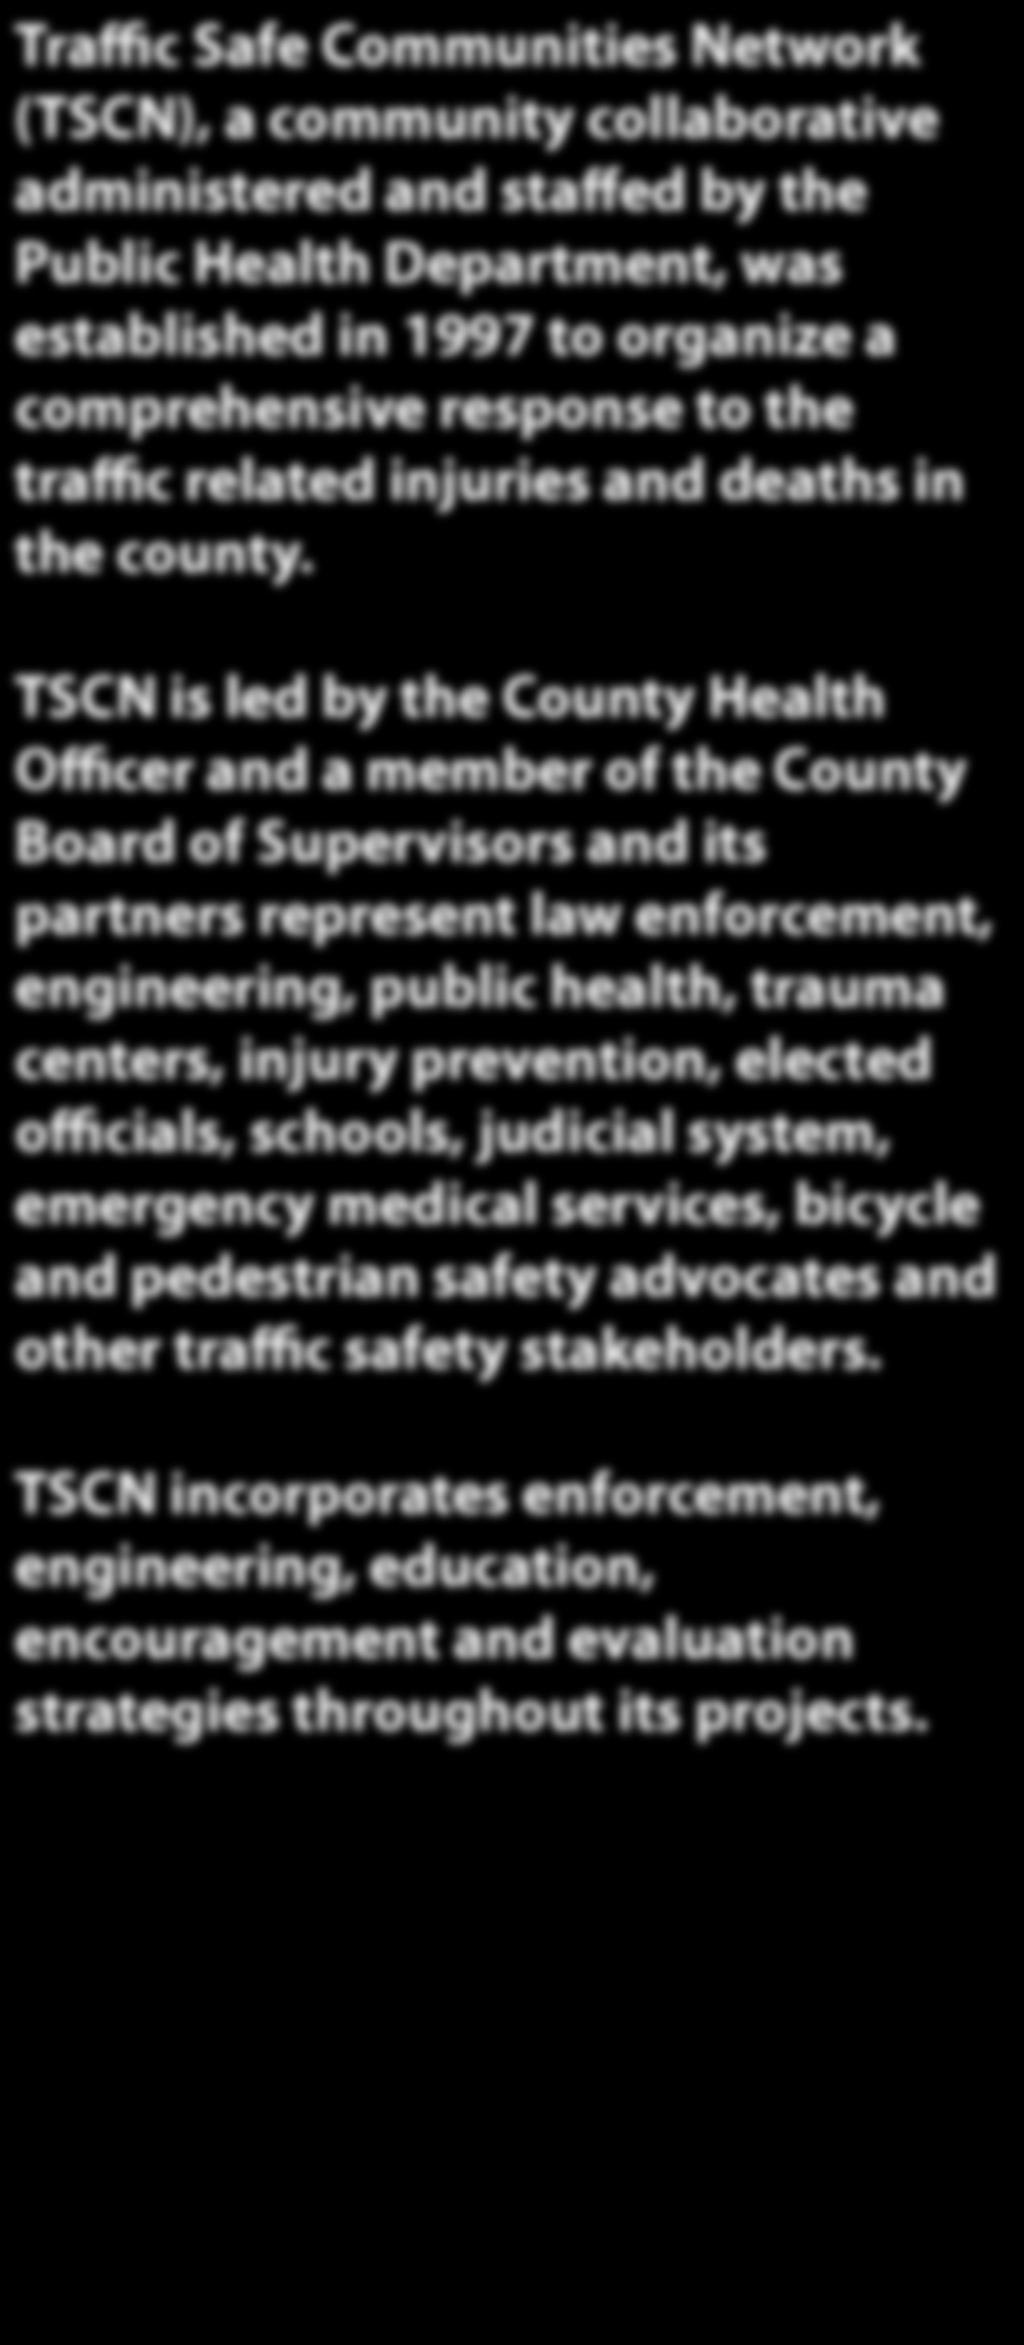 Traffic Safe Communities Network (TSCN), a community collaborative administered and staffed by the Public Health Department, was established in 1997 to organize a comprehensive response to the